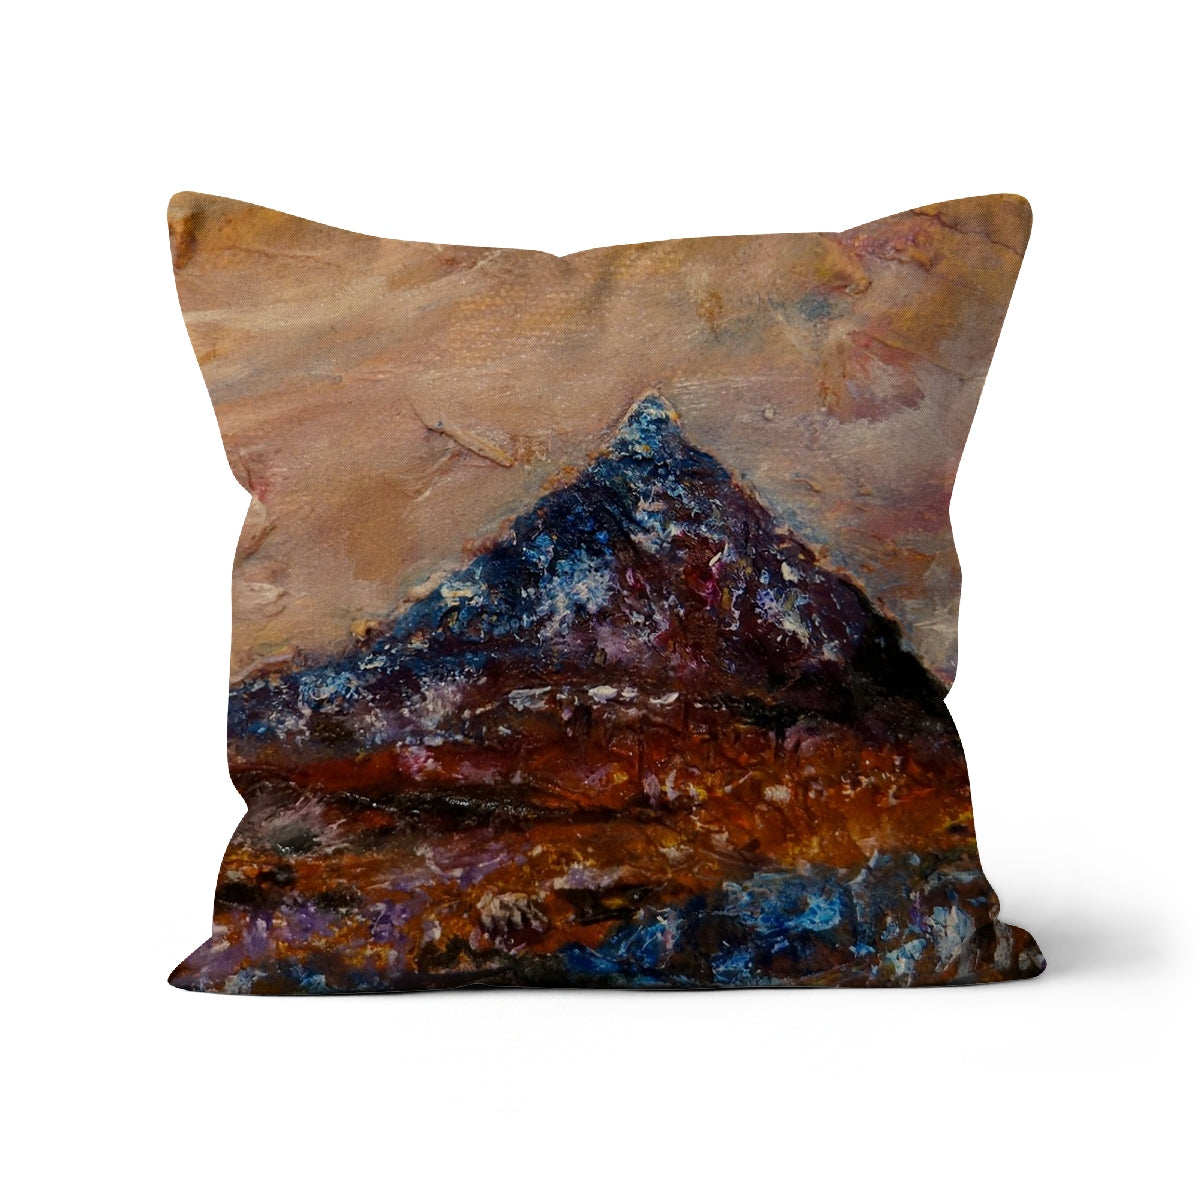 Buachaille Etive Mòr Art Gifts Cushion-Cushions-Glencoe Art Gallery-Canvas-12"x12"-Paintings, Prints, Homeware, Art Gifts From Scotland By Scottish Artist Kevin Hunter